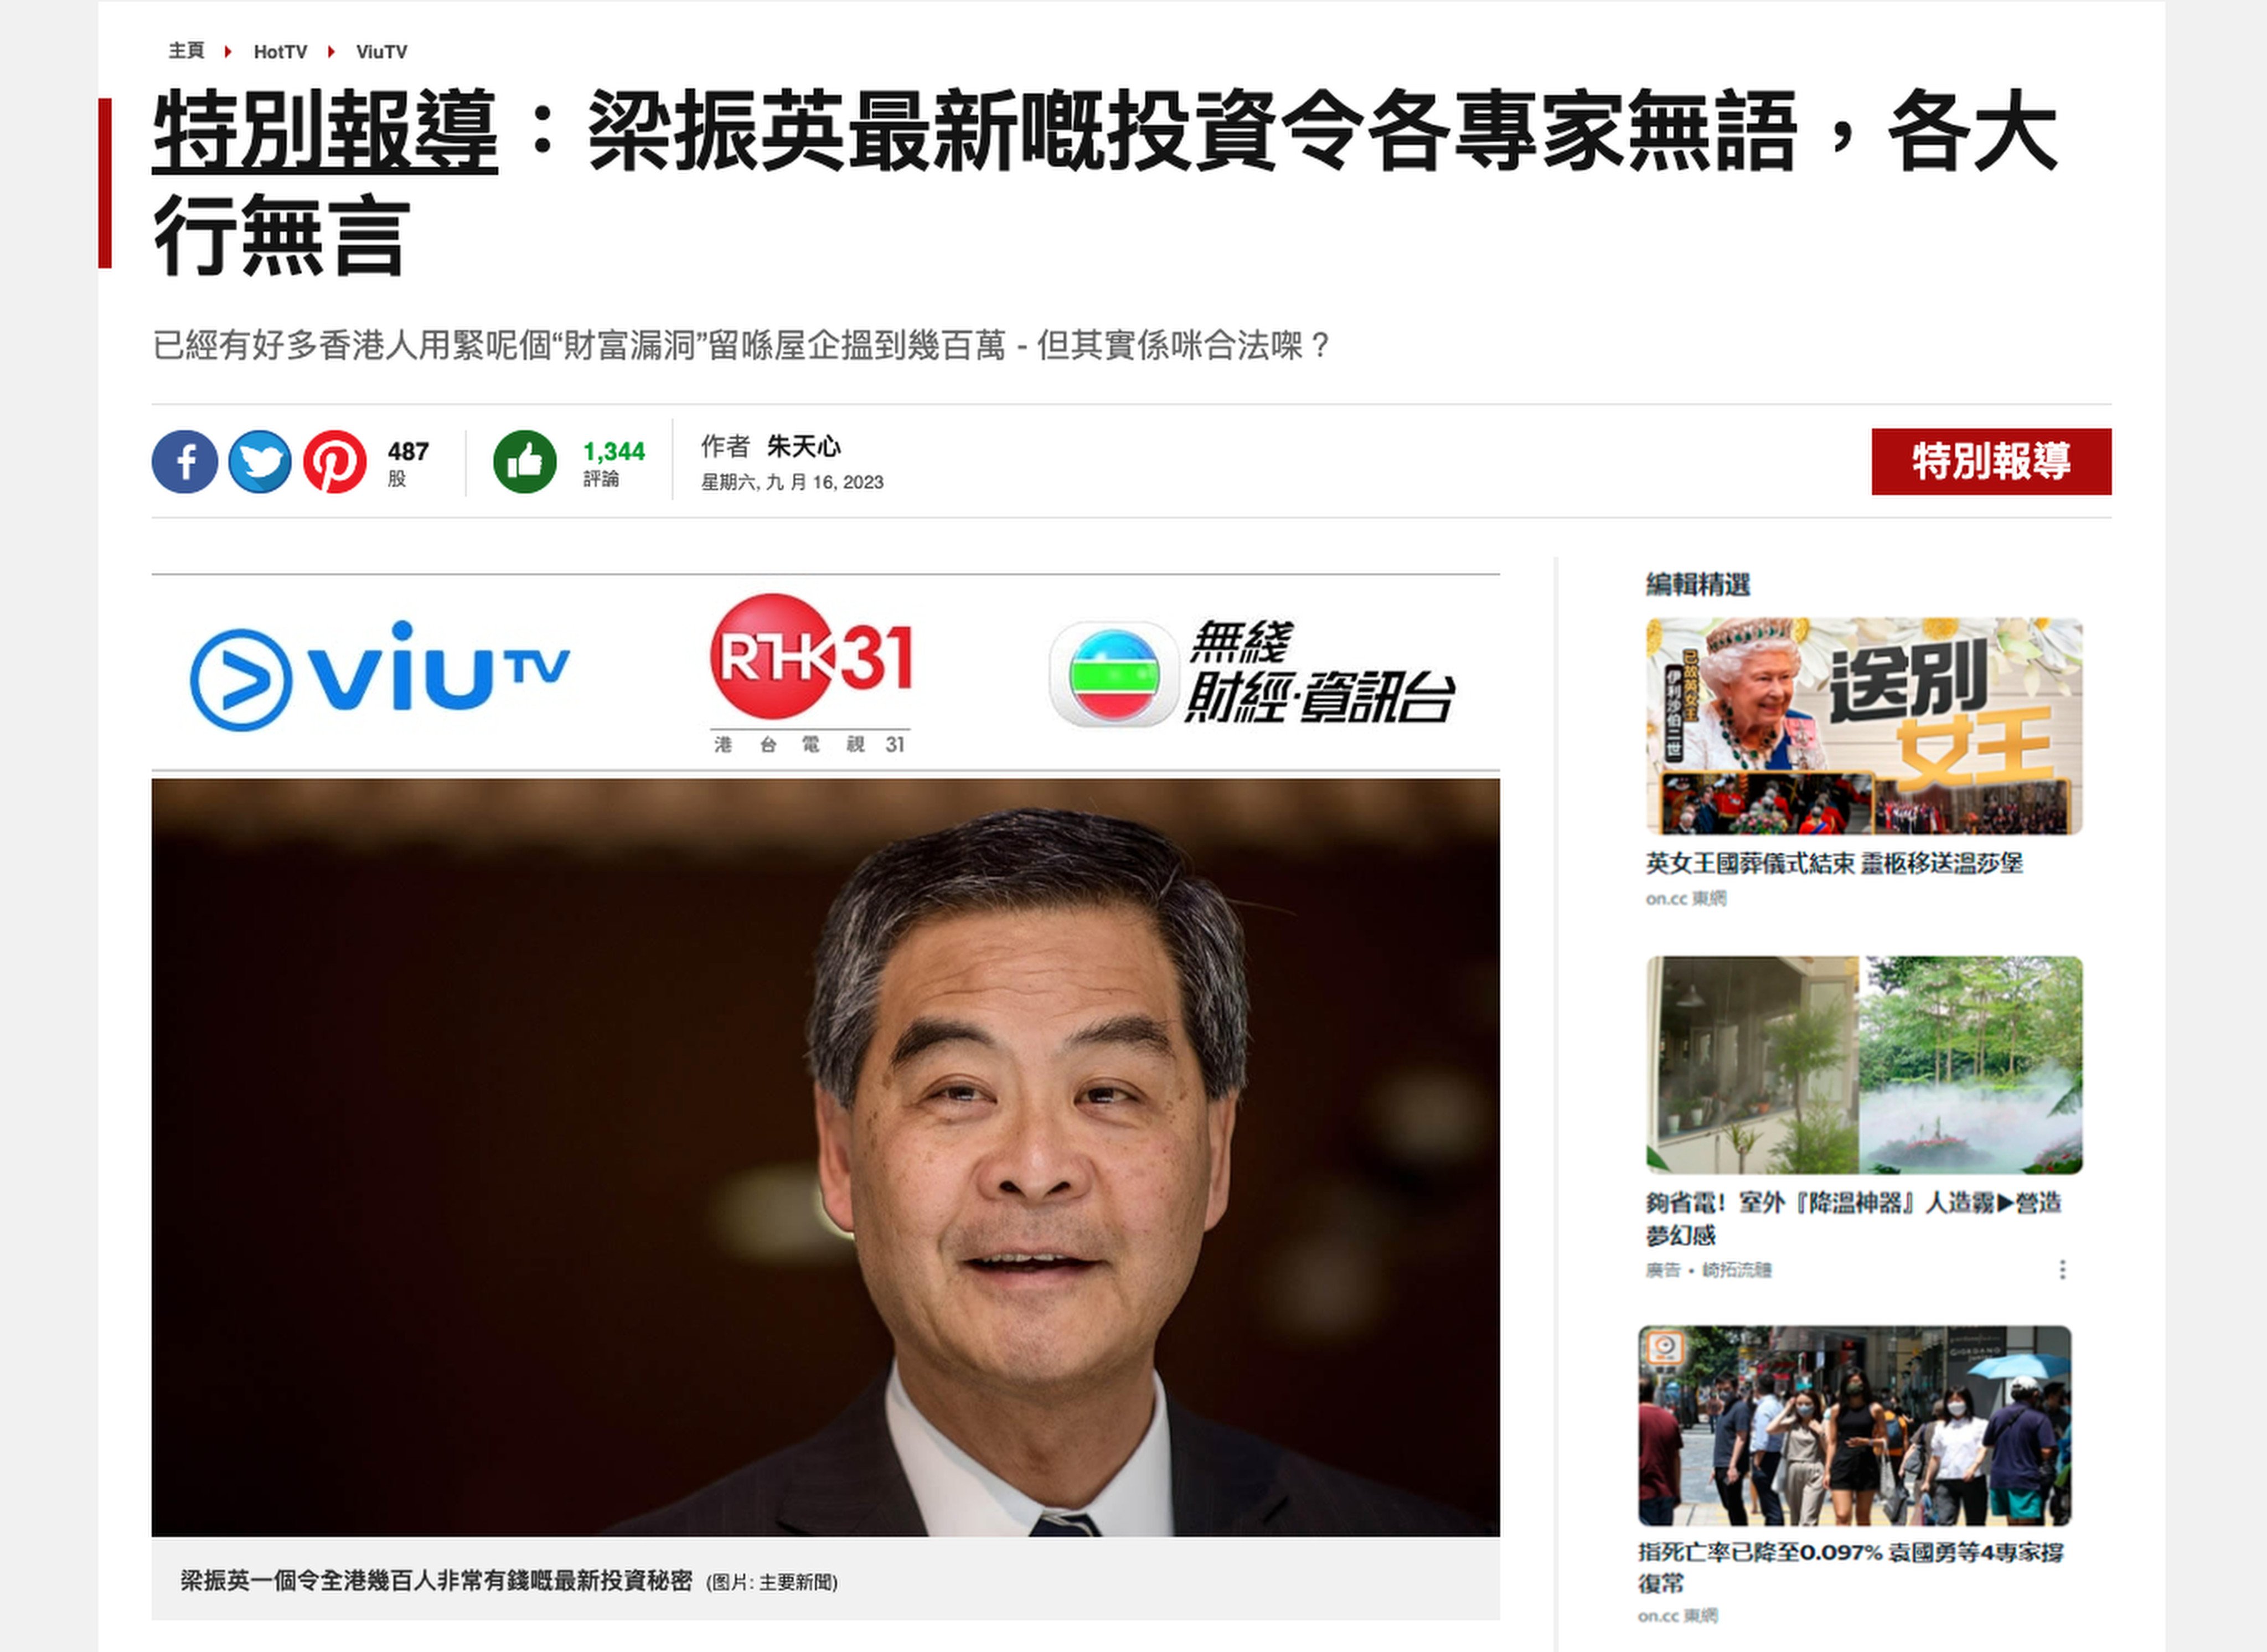 The bogus advert featuring CY Leung’s image said he attended an interview with a local broadcaster. Photo: SCMP